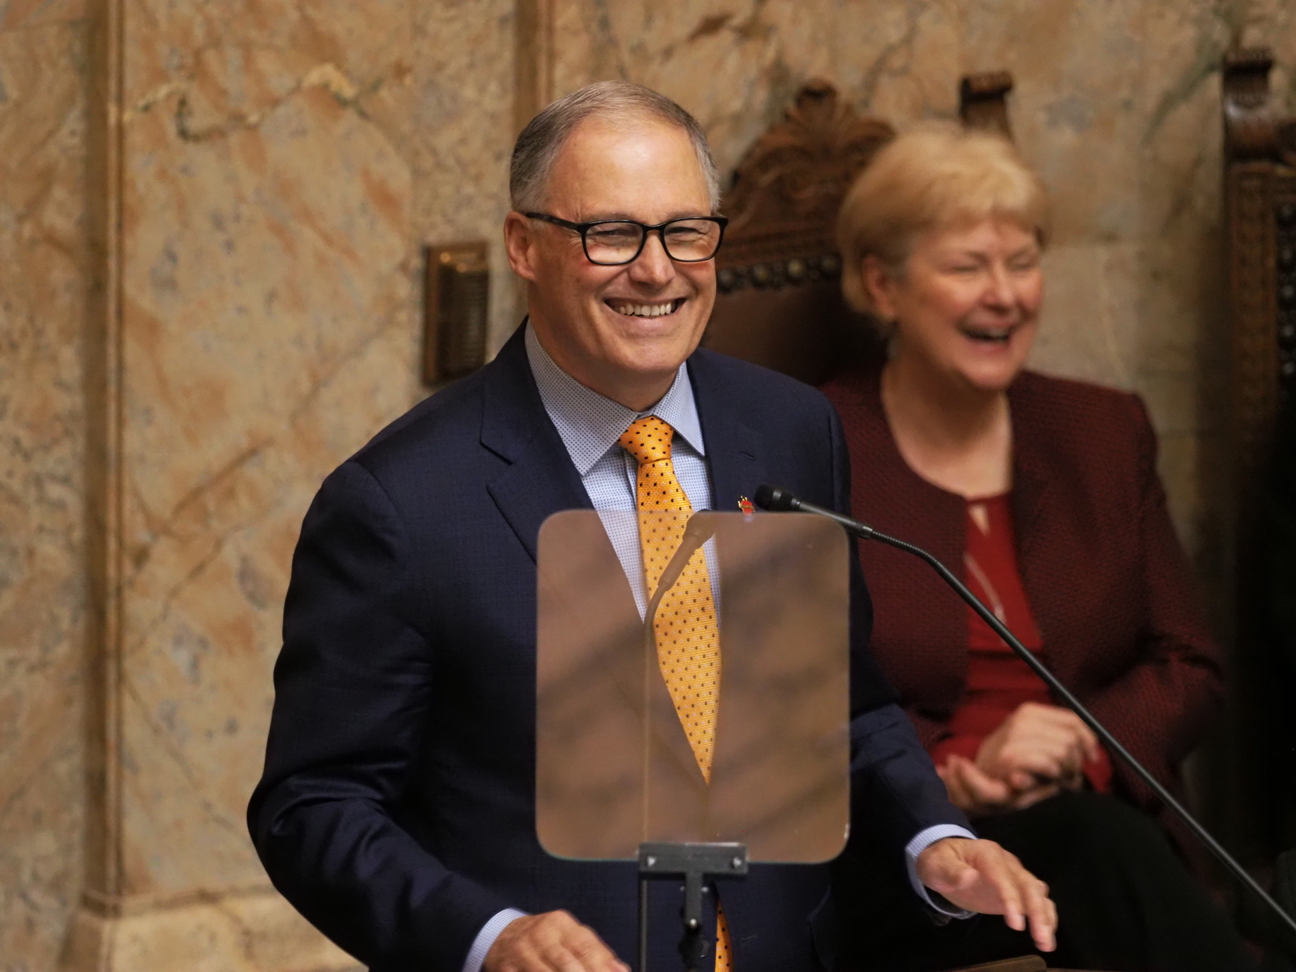 Governor Inslee delivers the 2020 State of the State Address